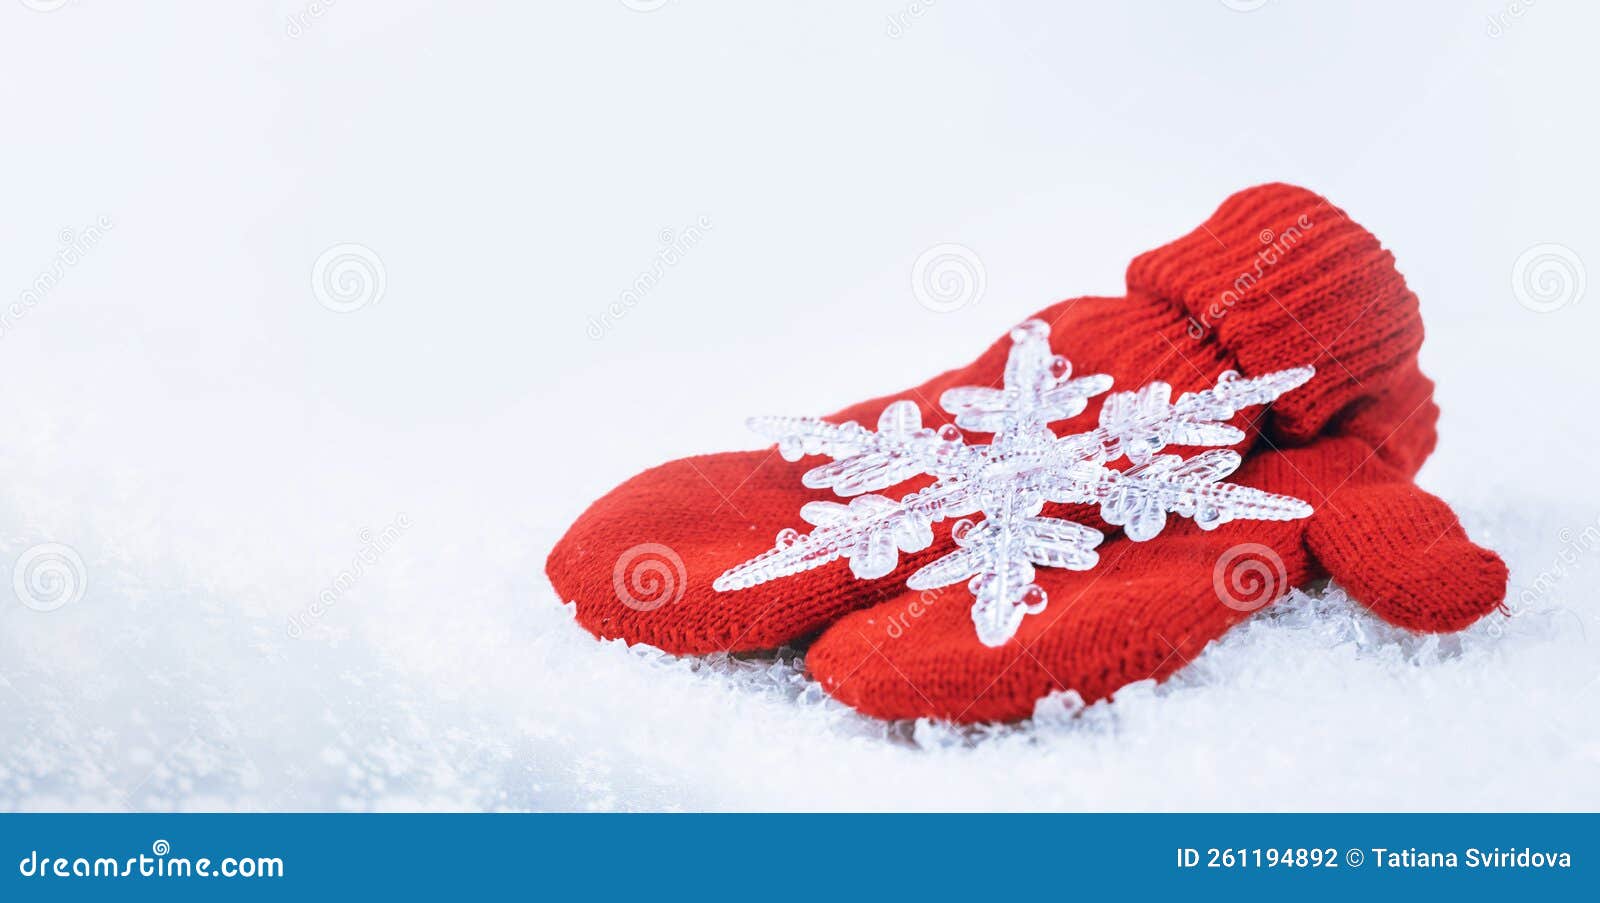 A Pair of Red Mittens on the Snow Stock Photo - Image of season, cool ...